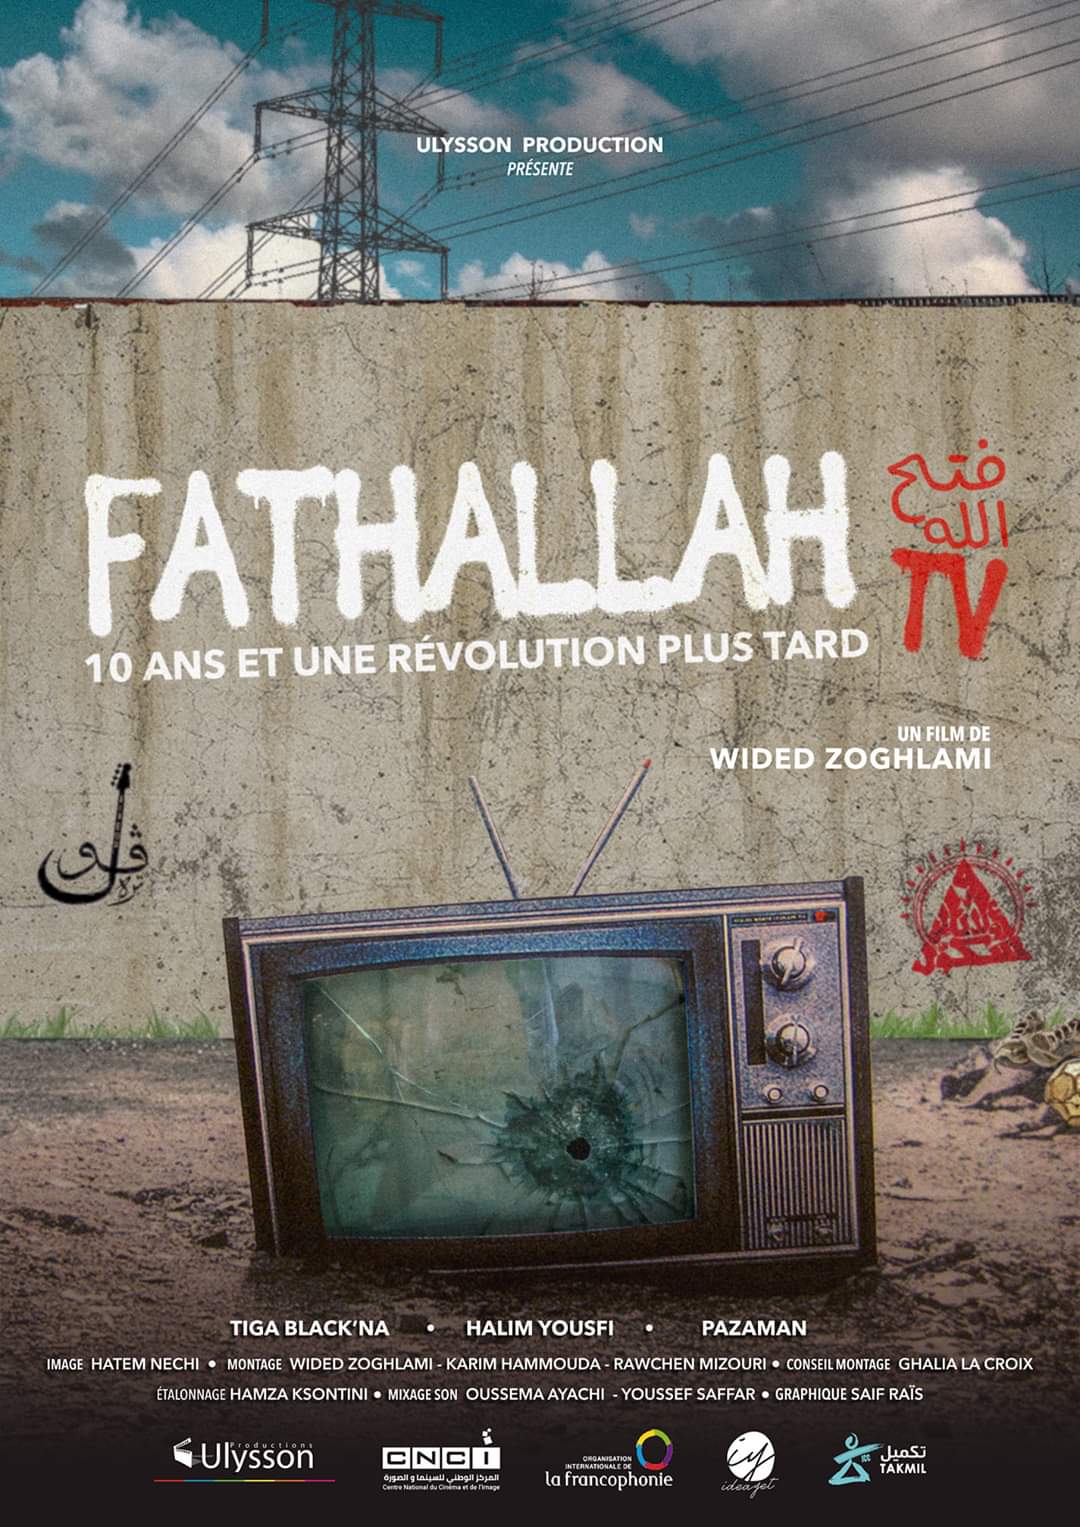 Fathallah TV, 10 Years and a Revolution Later